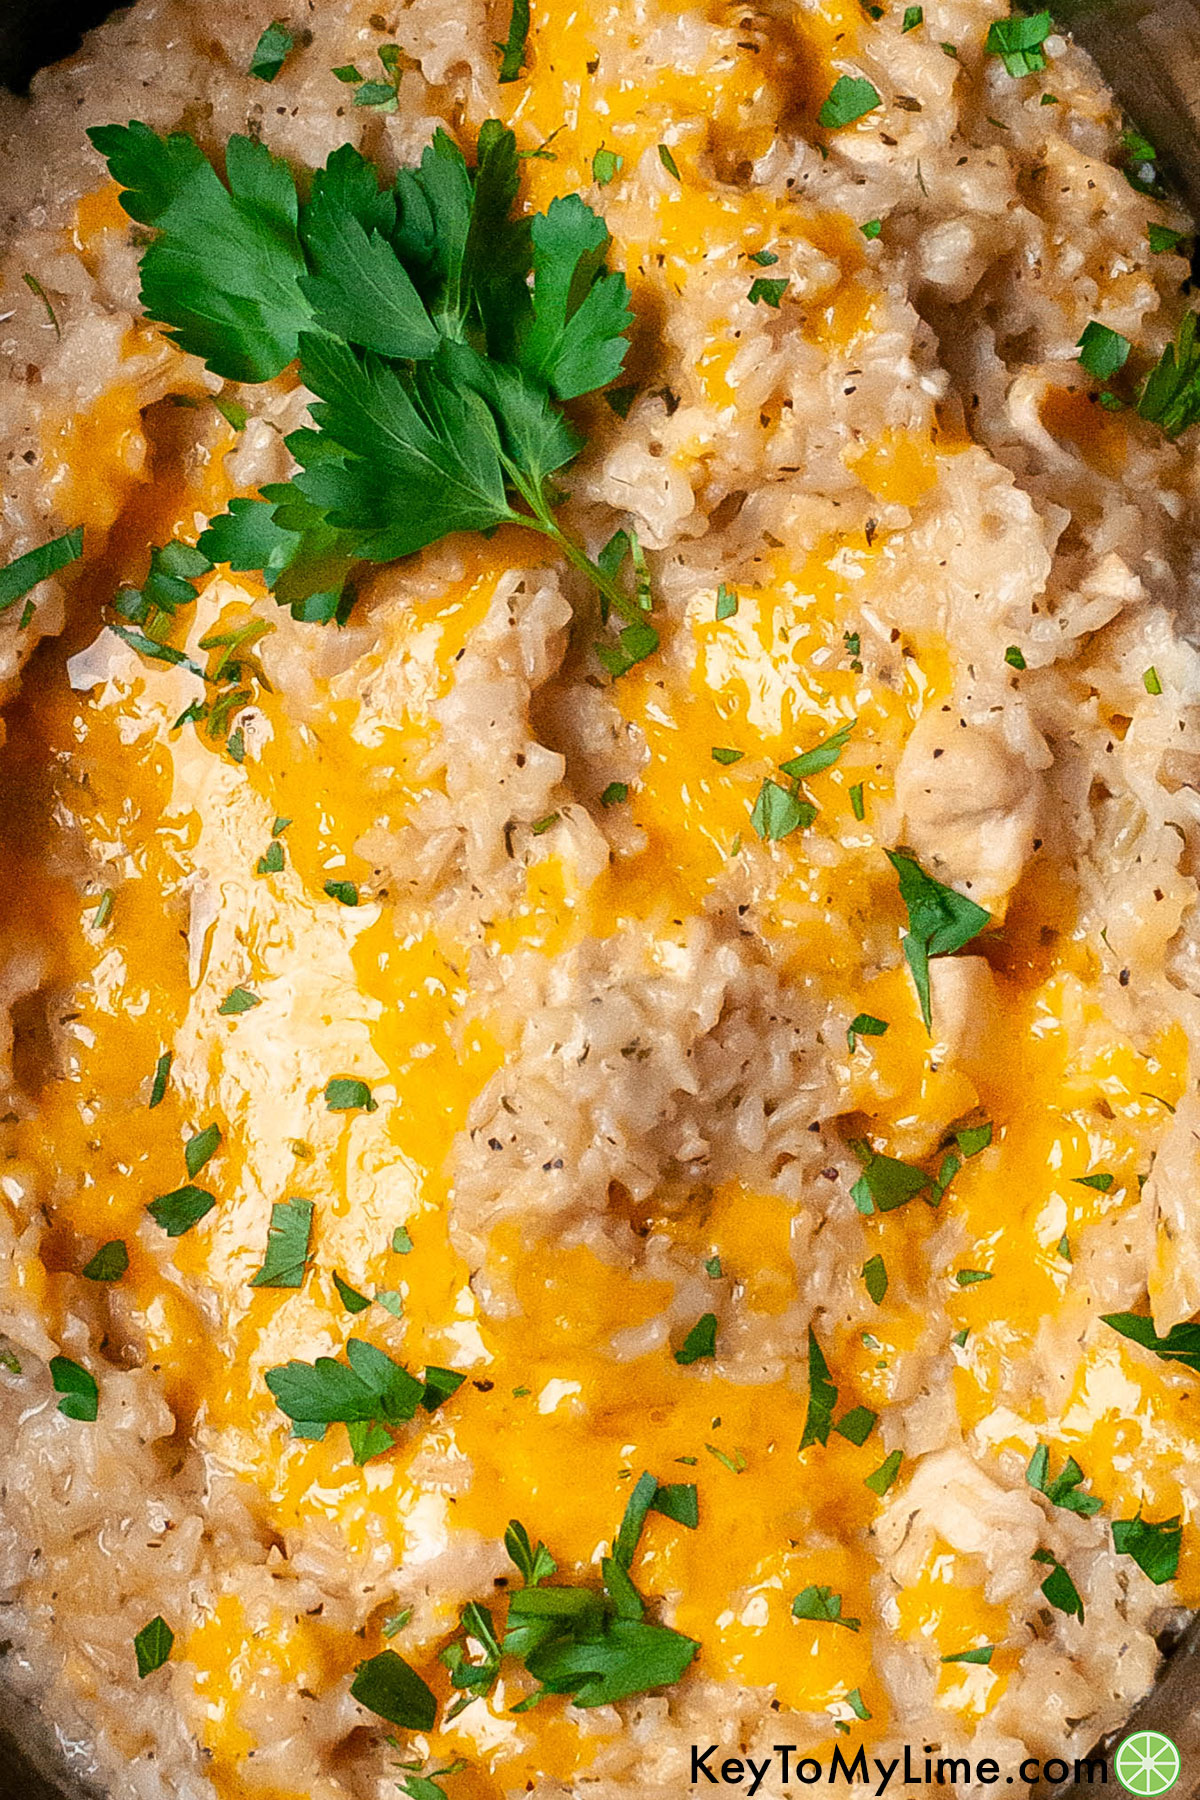 A fully cooked chicken and rice dish with fresh parsley throughout.